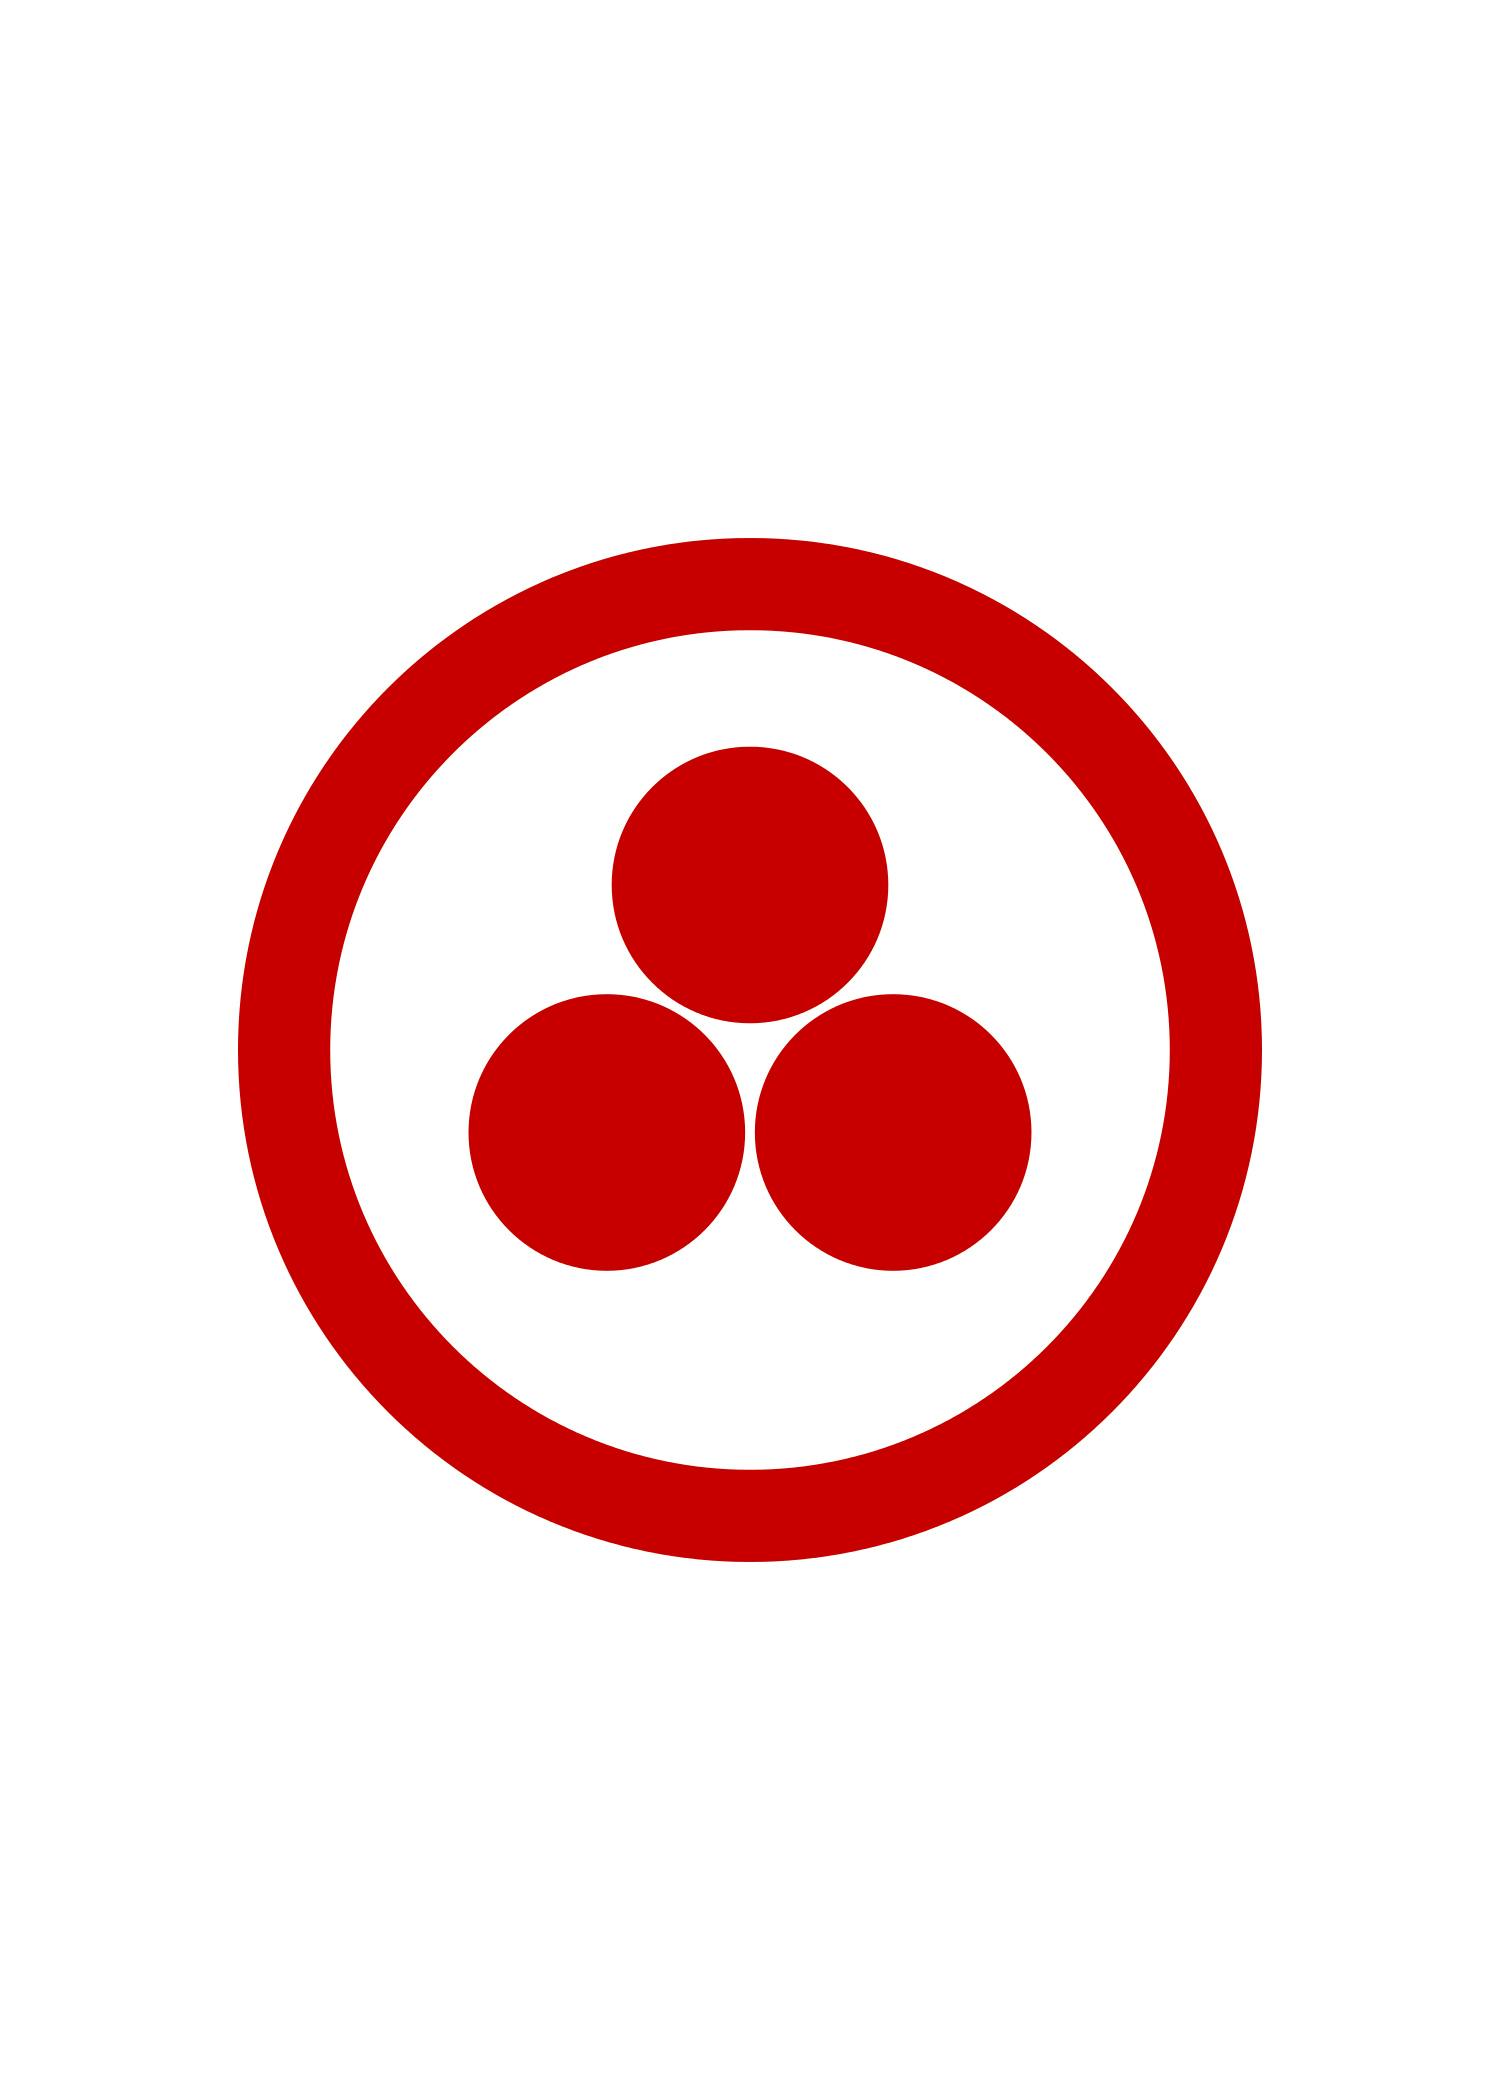 Symbol of the Banner of Peace designed by Nikolai Konstantinovič Rerich: three red spheres surrounded by a circle of the same color on a white background.